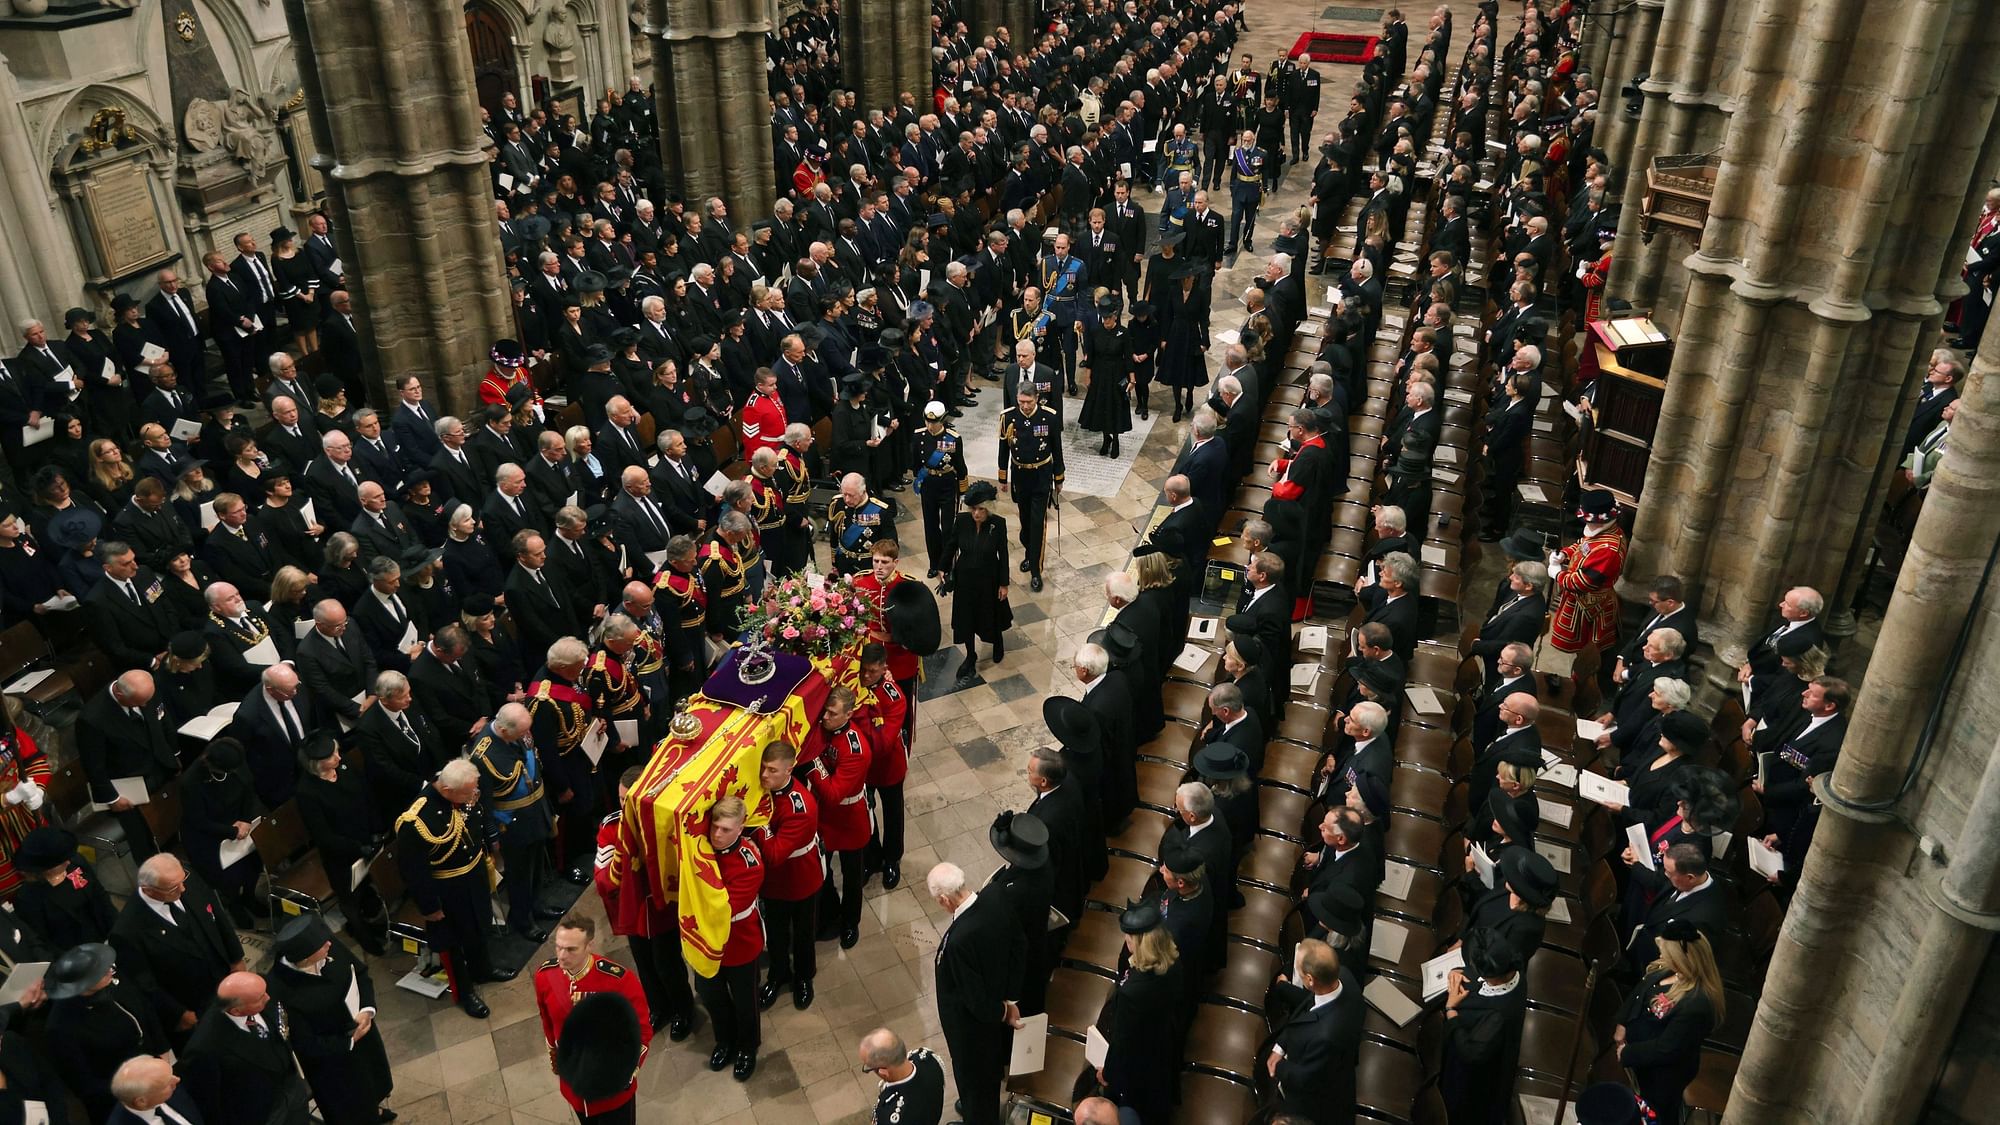 <div class="paragraphs"><p>King Charles III, Camilla, Queen Consort, and other members of the Royal family follow the coffin of Queen Elizabeth II as it is carried into Westminster Abbey ahead of her State Funeral, in London, Monday Sept. 19, 2022.</p></div>